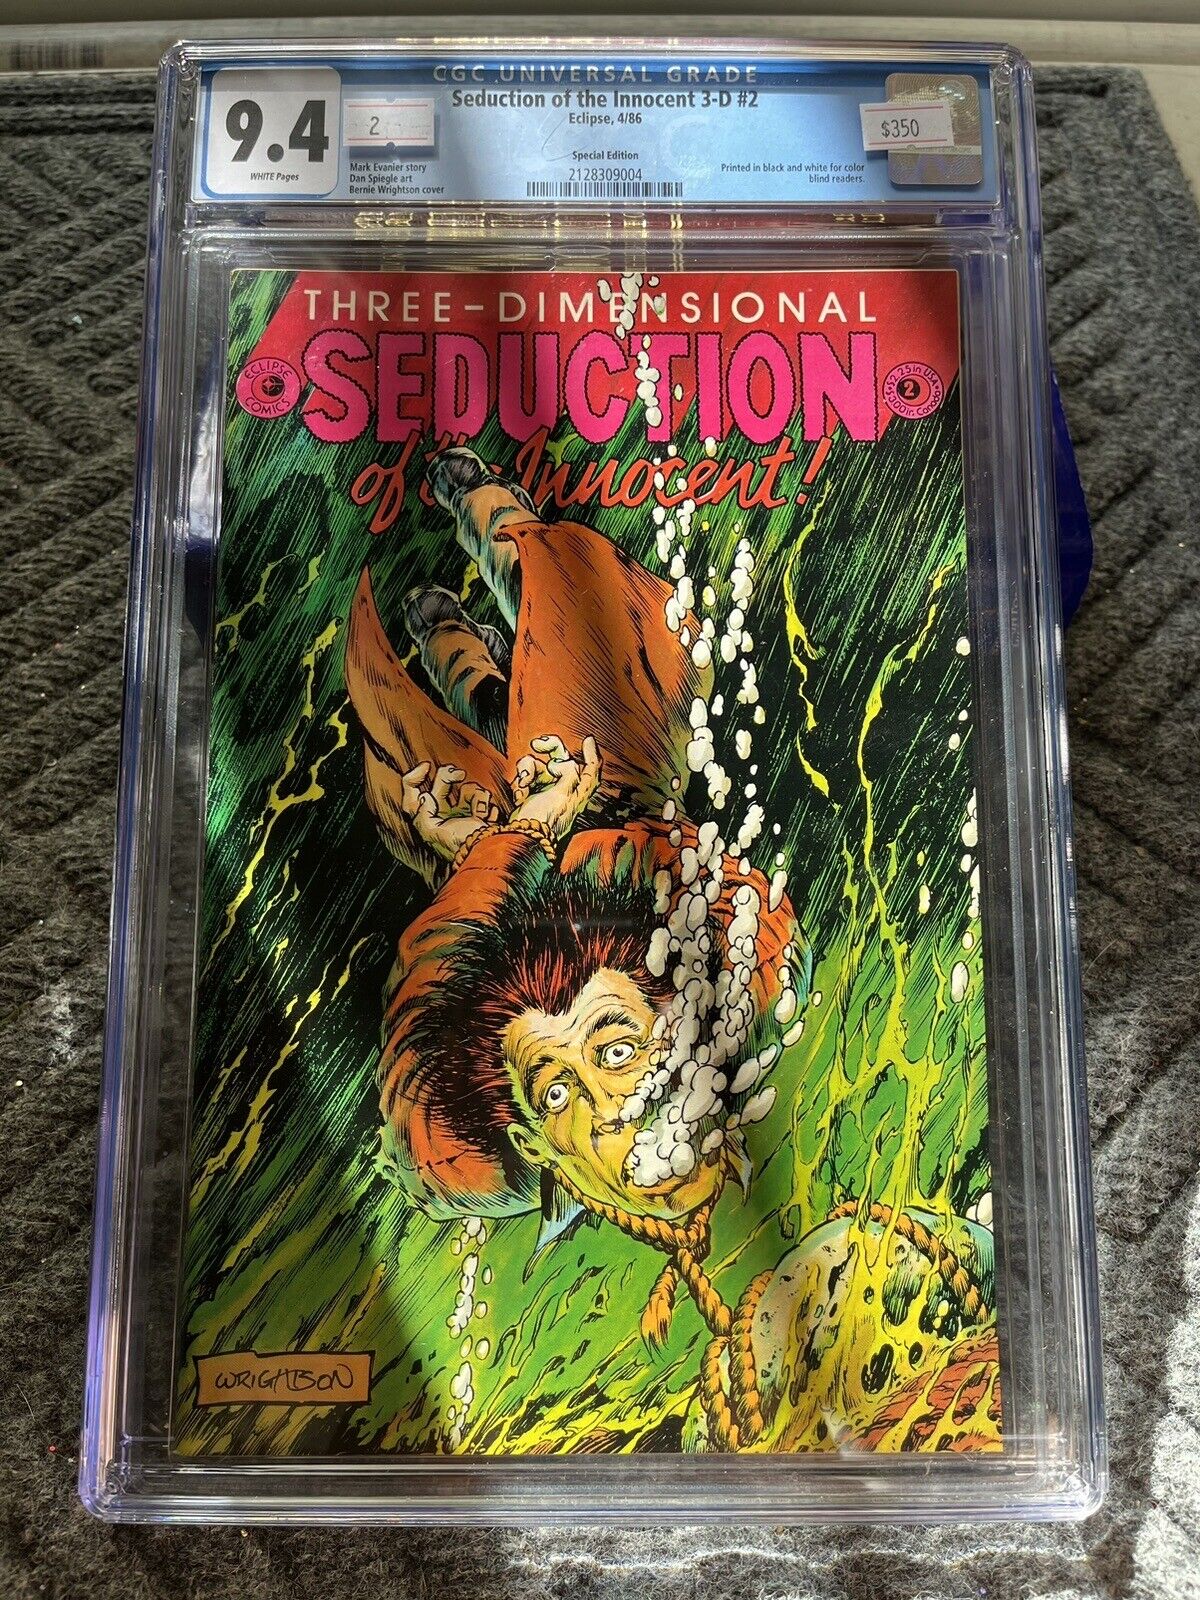 Seduction of the Innocent 3-D Issue 2 Special Edition Only 2 Graded CGC 9.4